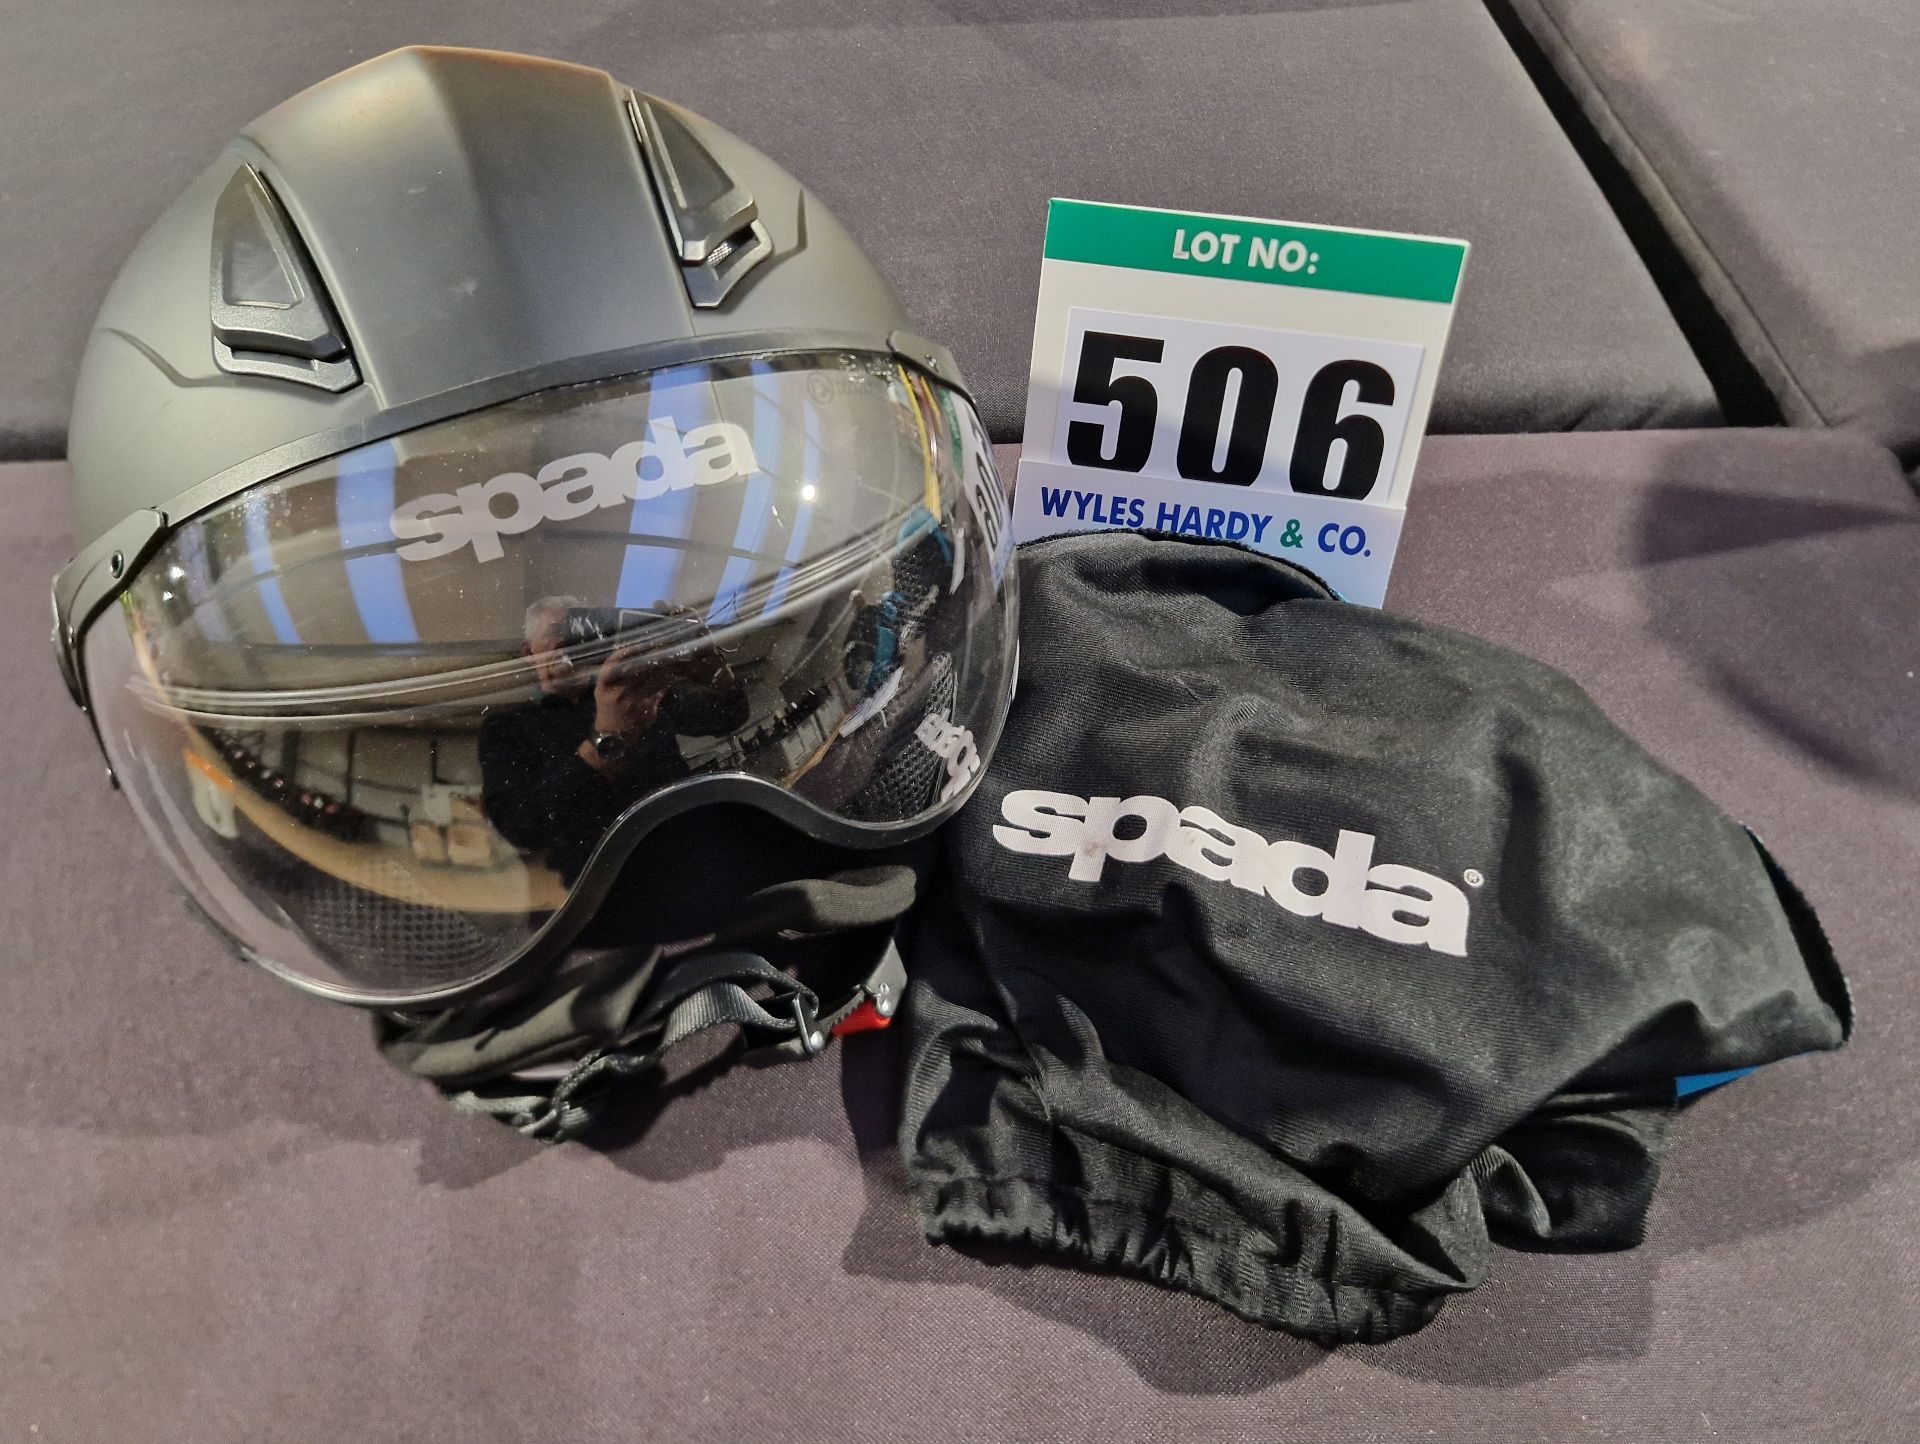 A SPADA Open Face Helmet with Drop Down Visor, Size L (59-60cm), ECE R22-5 with Storage Bag